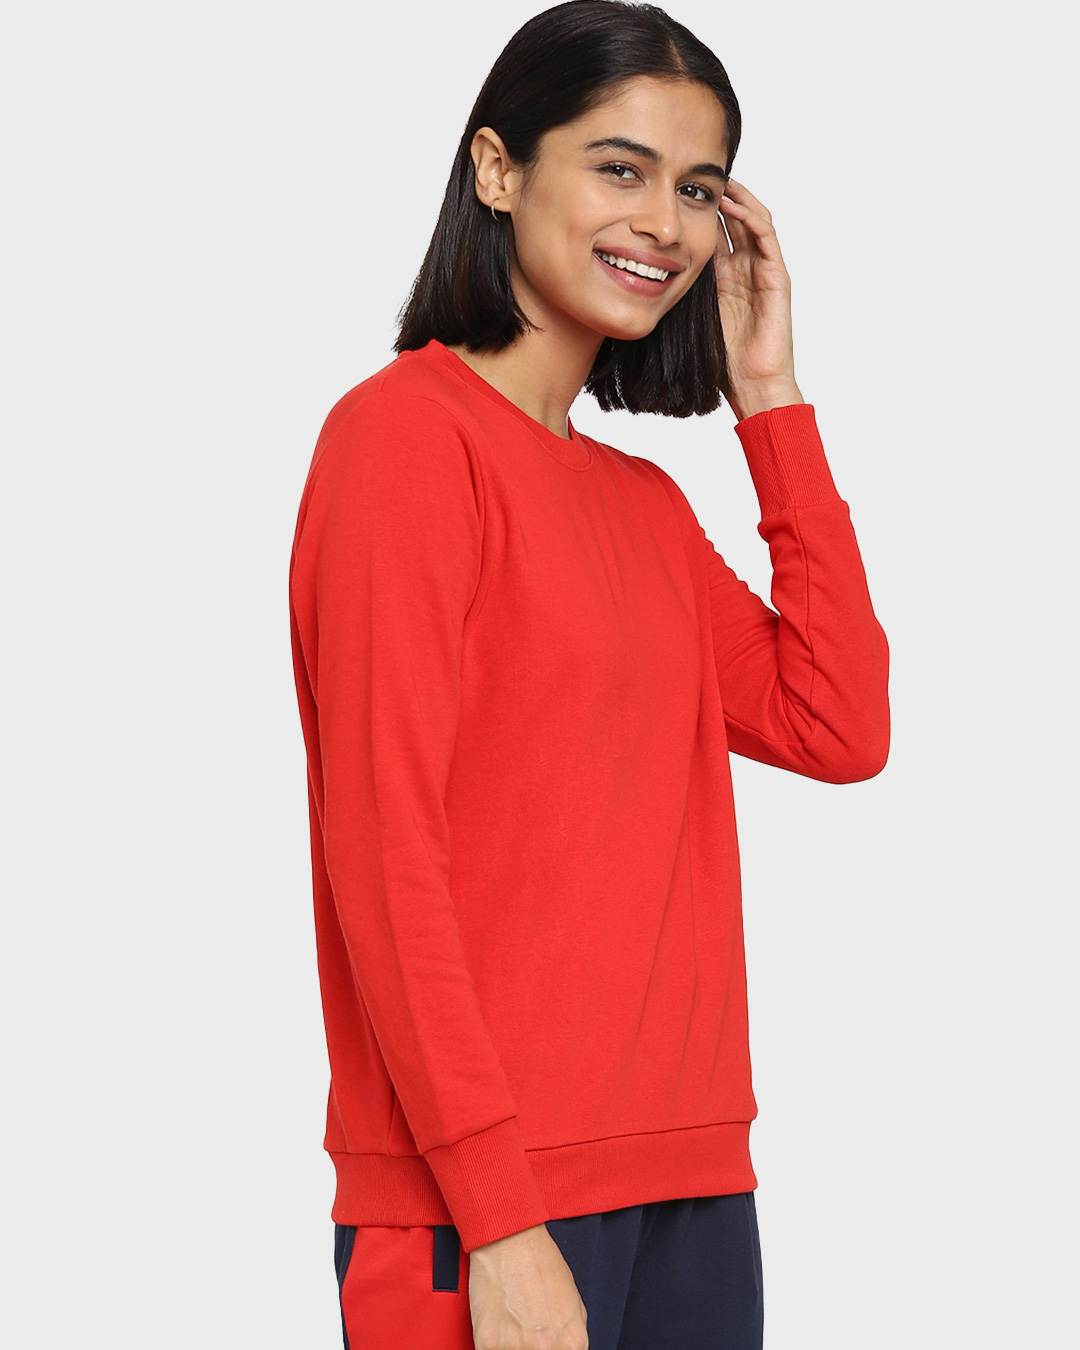 Shop Women's Red Relaxed Fit Sweatshirt-Back